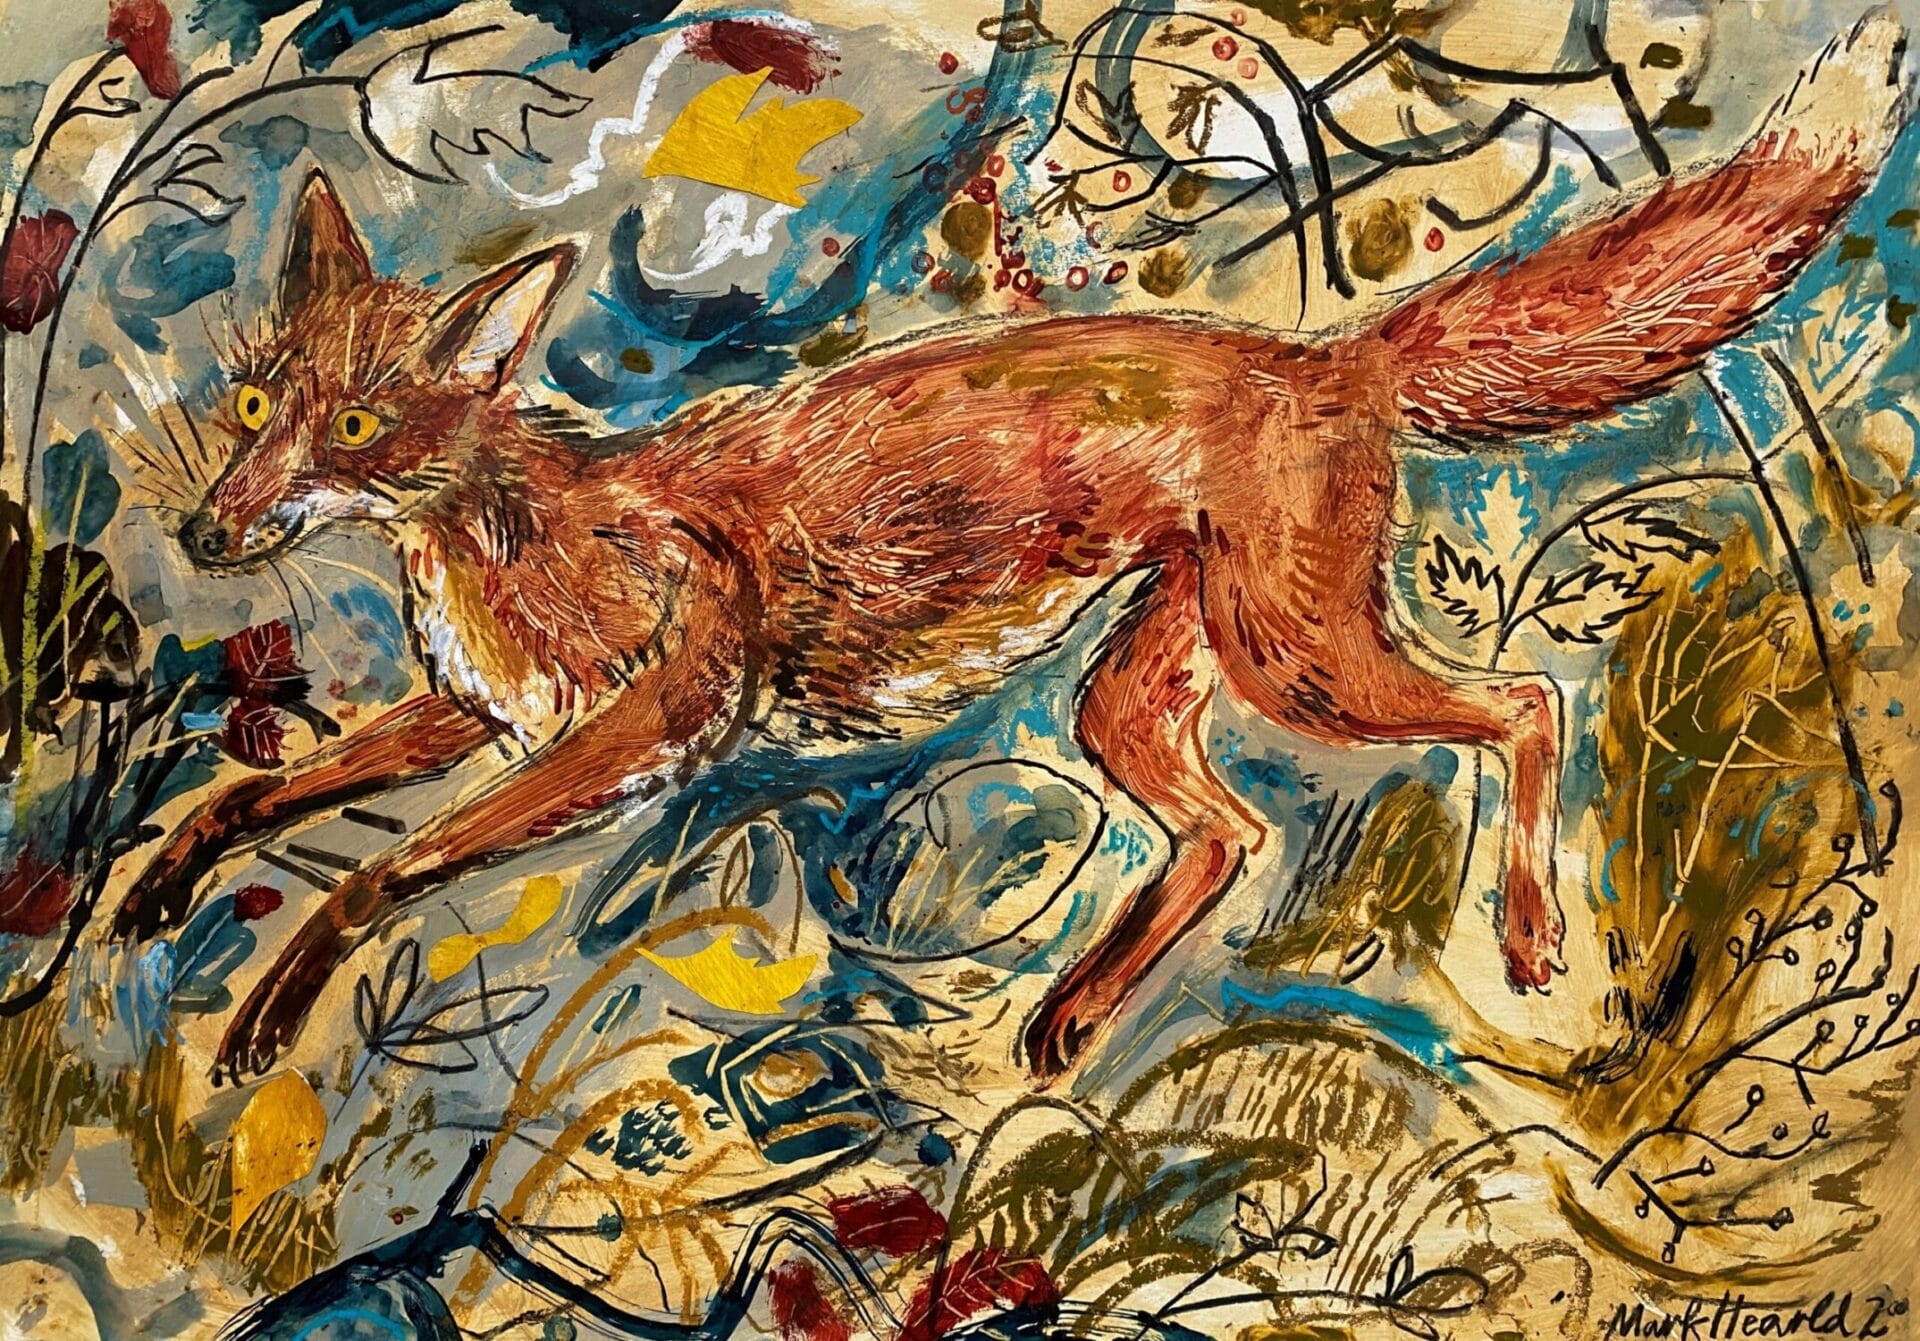 A Light Footed Fox, Mark Hearld, collage and mixed media, 75 x 110 cm